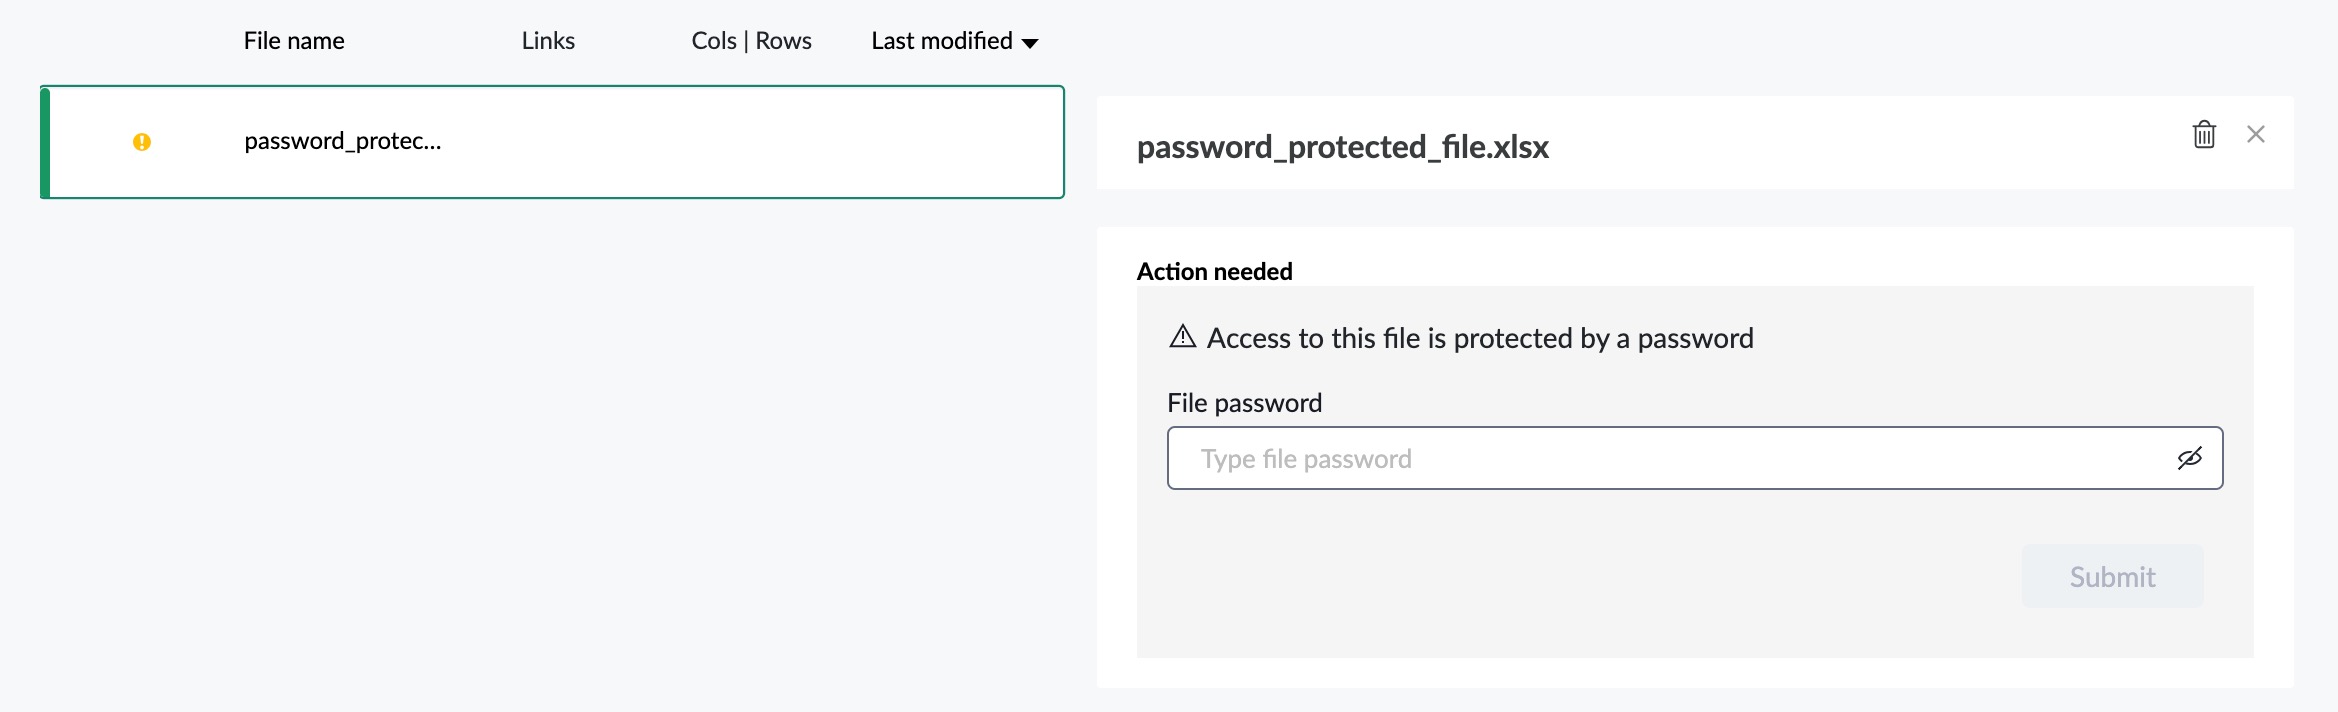 password protected file upload